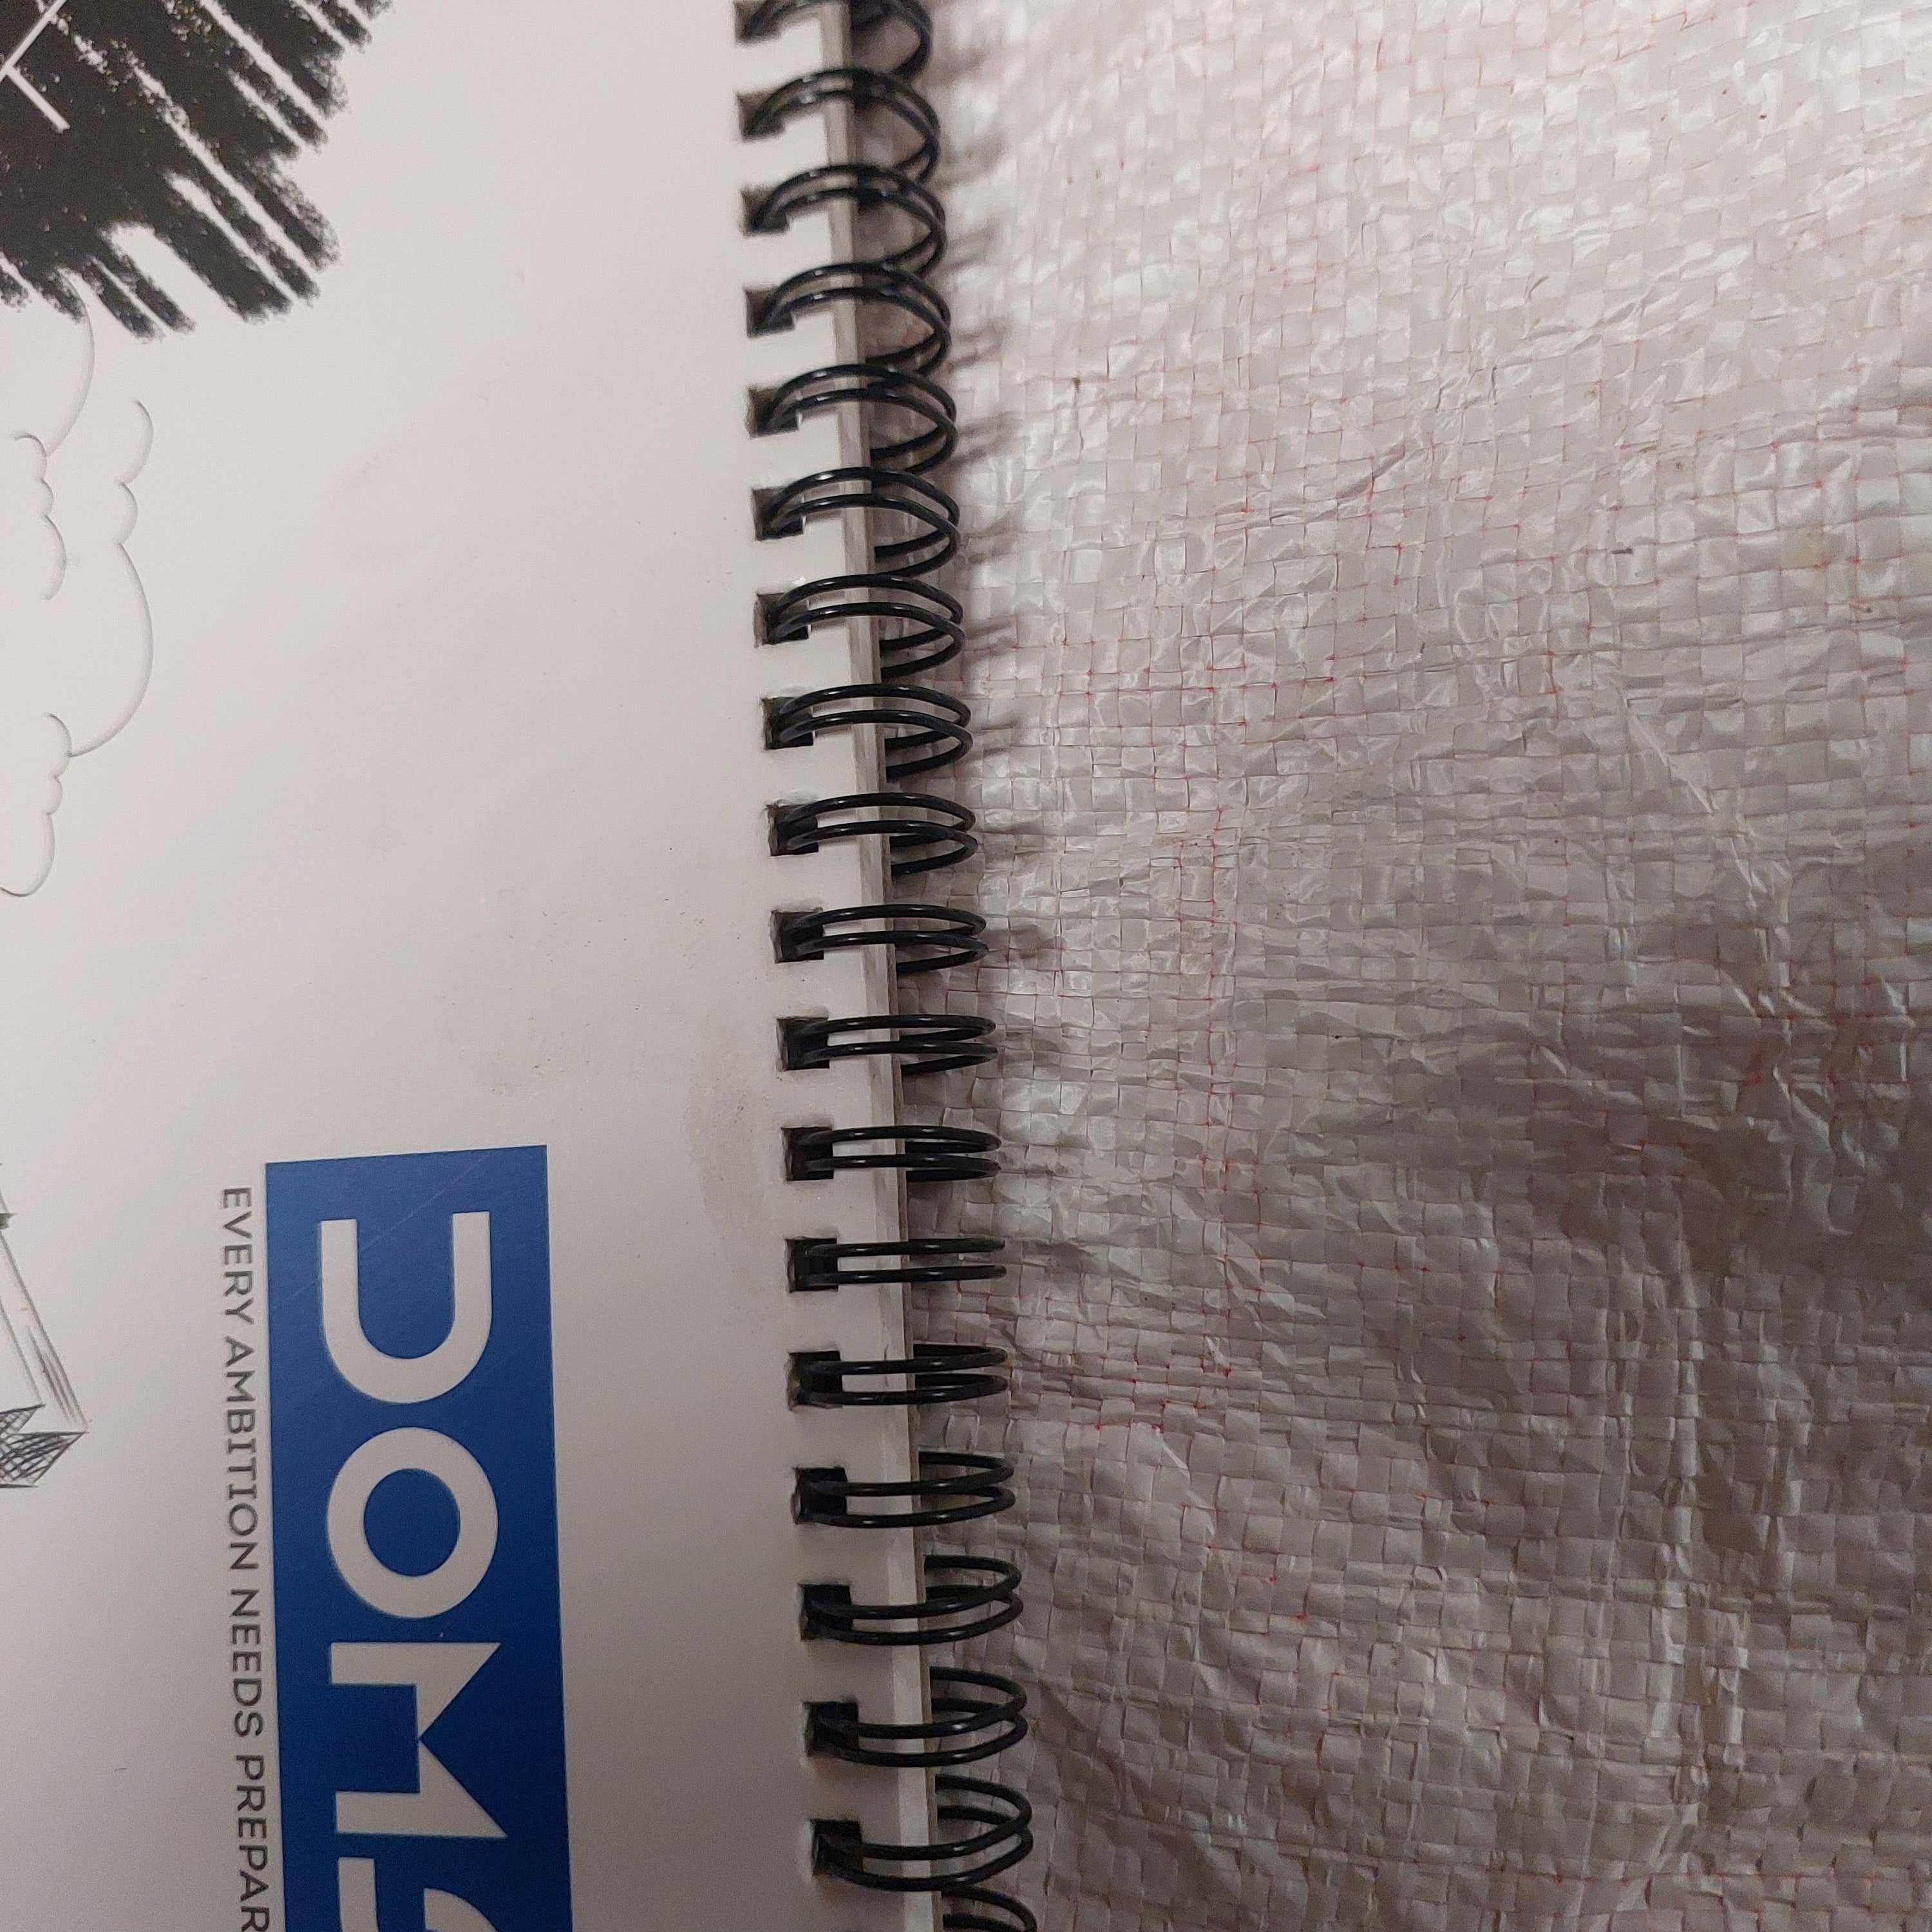 Sketch Pad from Doms-Quality and Economical 